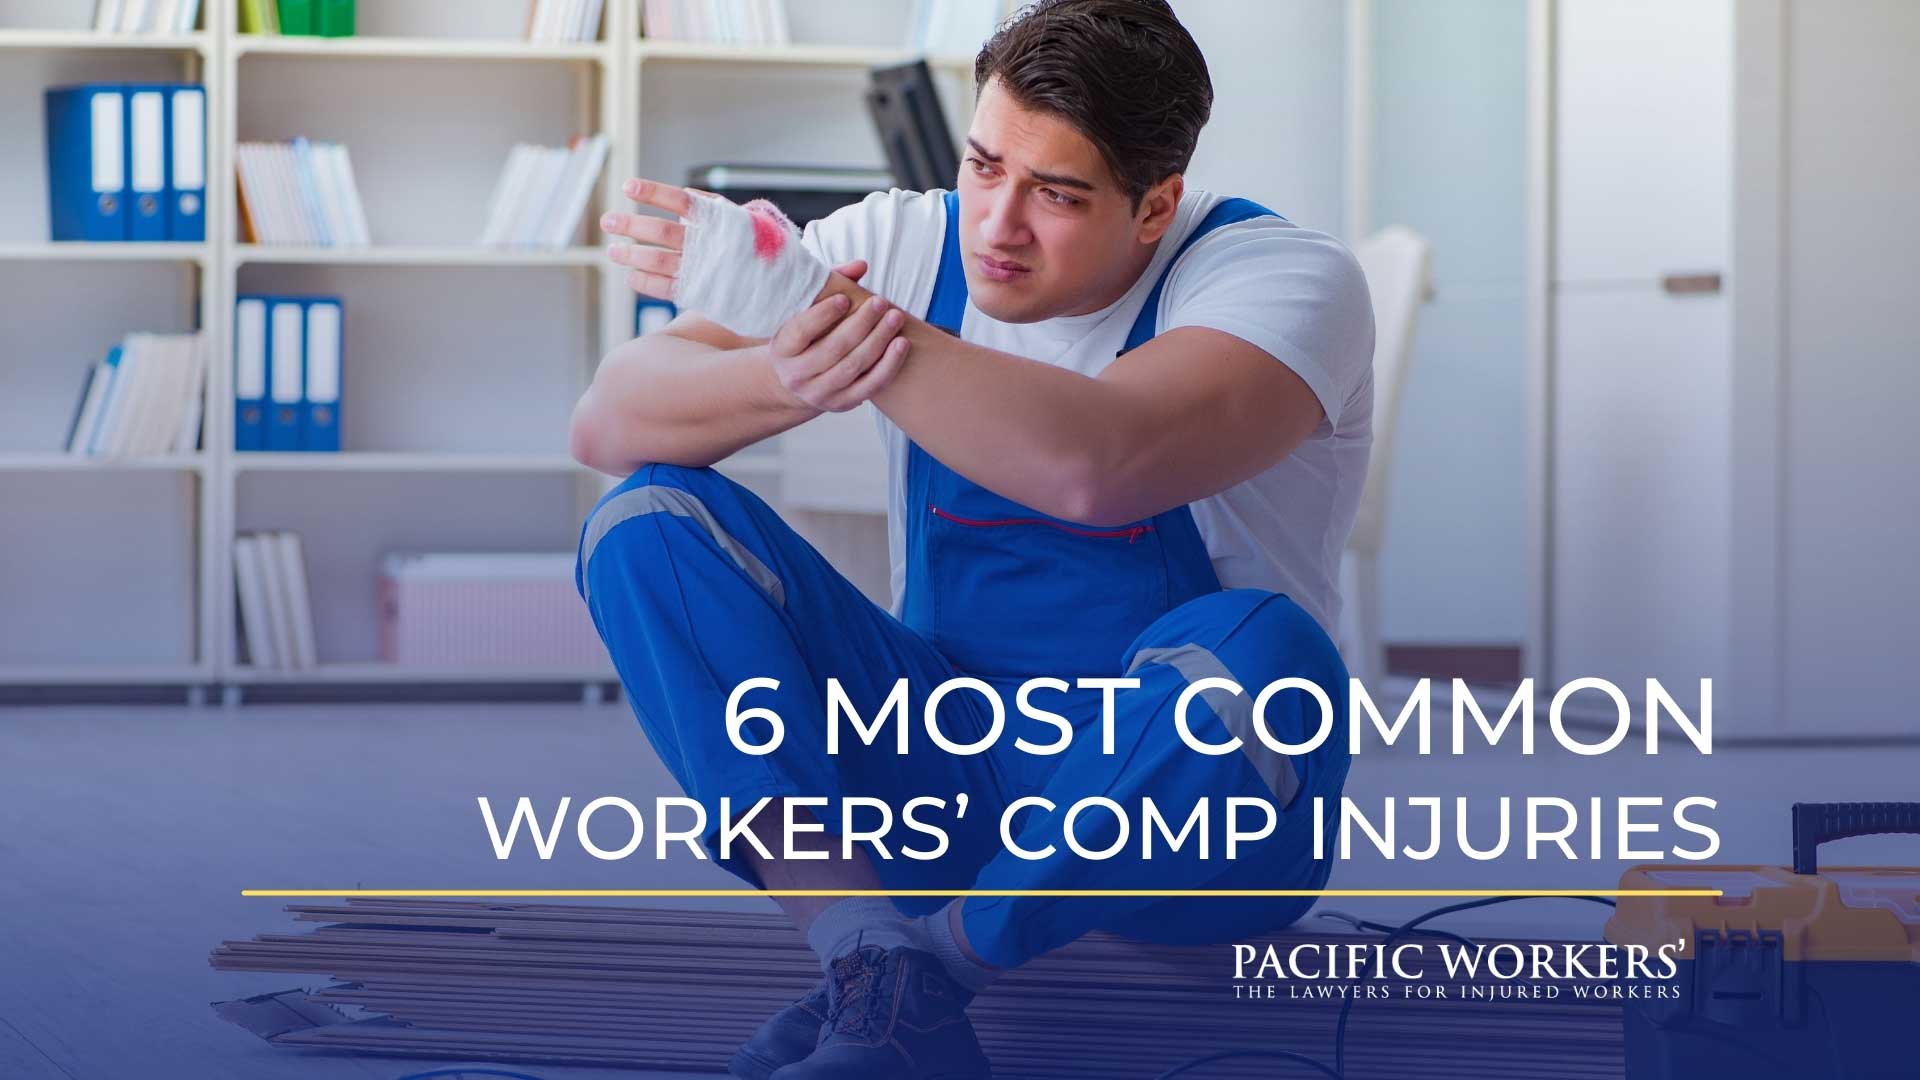 6 Most Common Workers' Comp Injuries